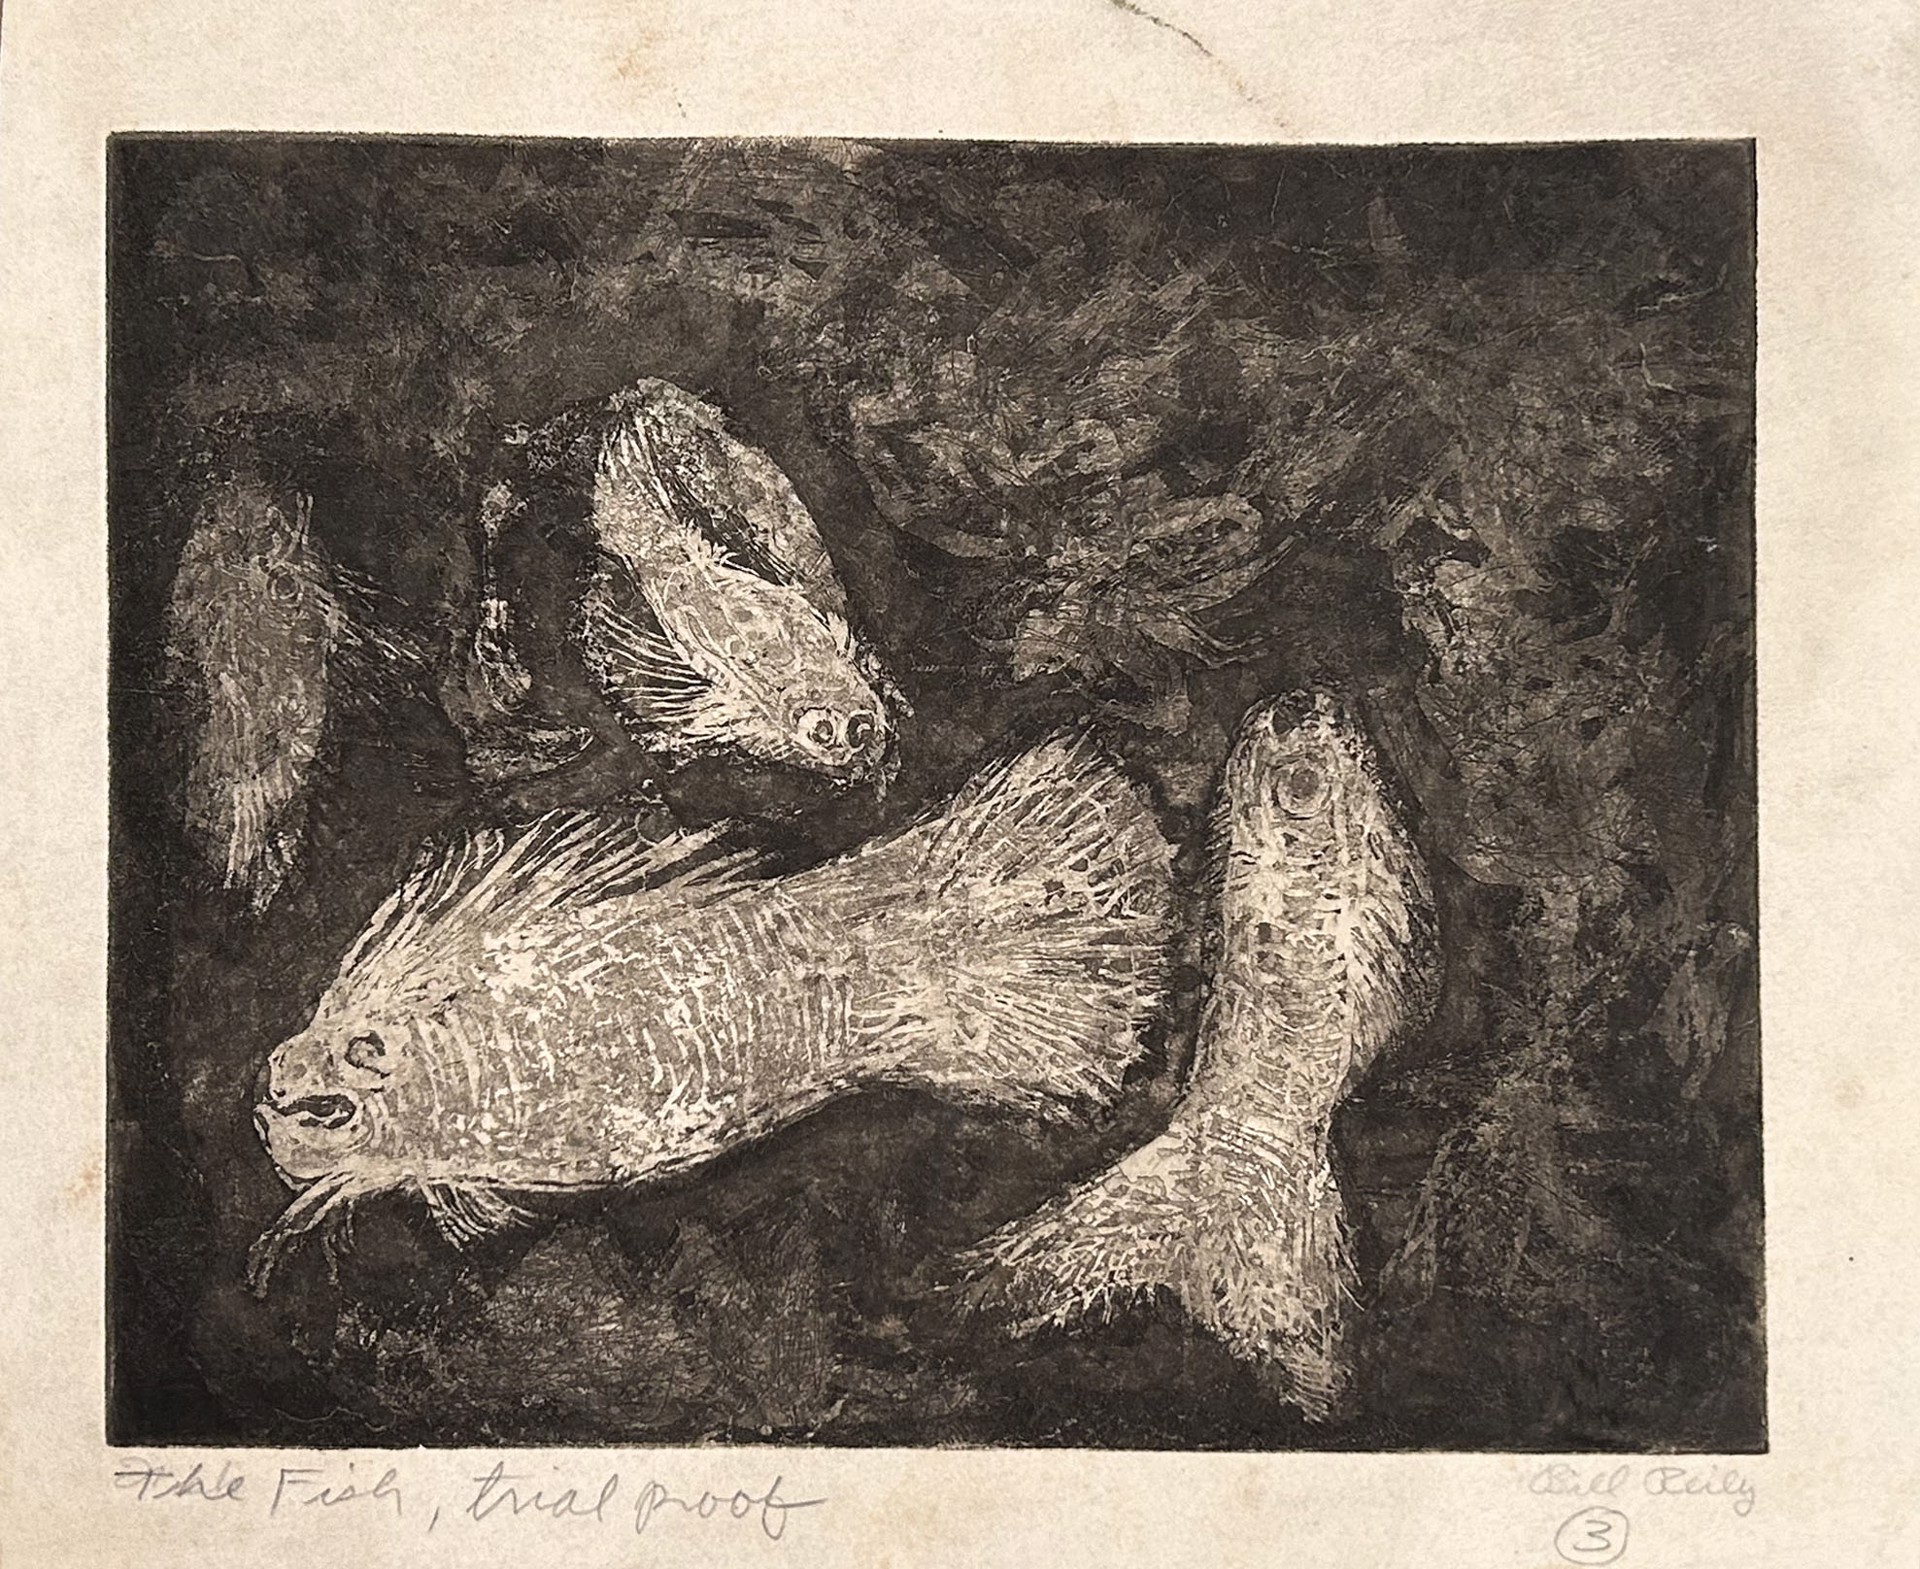 3. The Fish (Trial proof) by Bill Reily - Prints